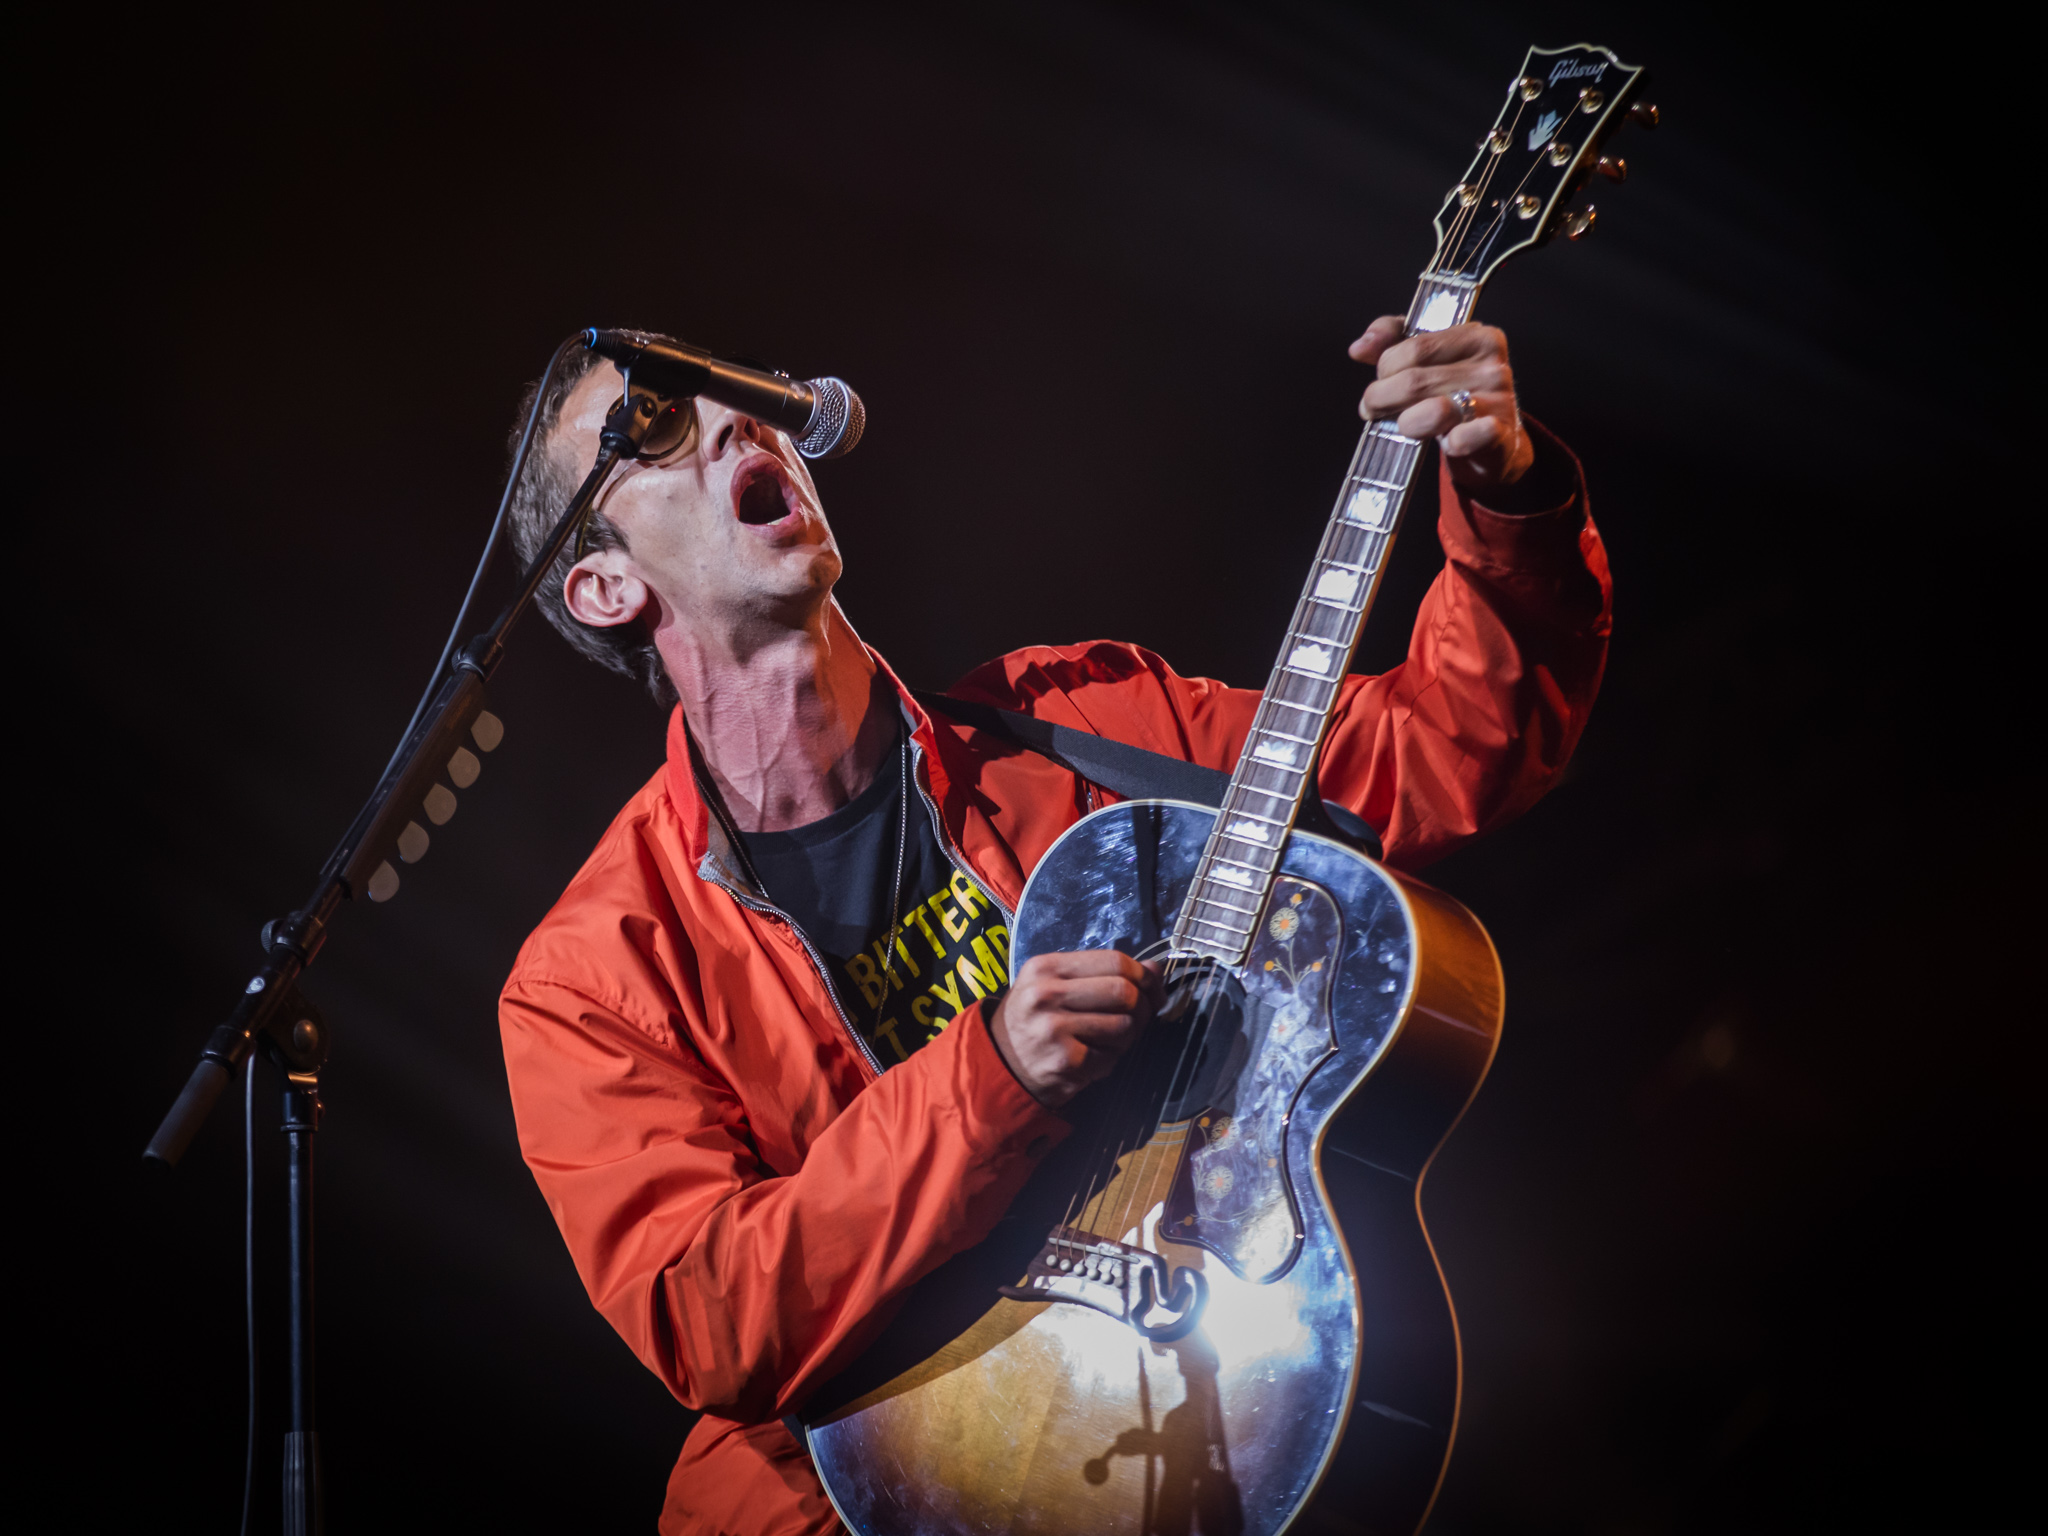 Richard Ashcroft by Bullet-ray Photography